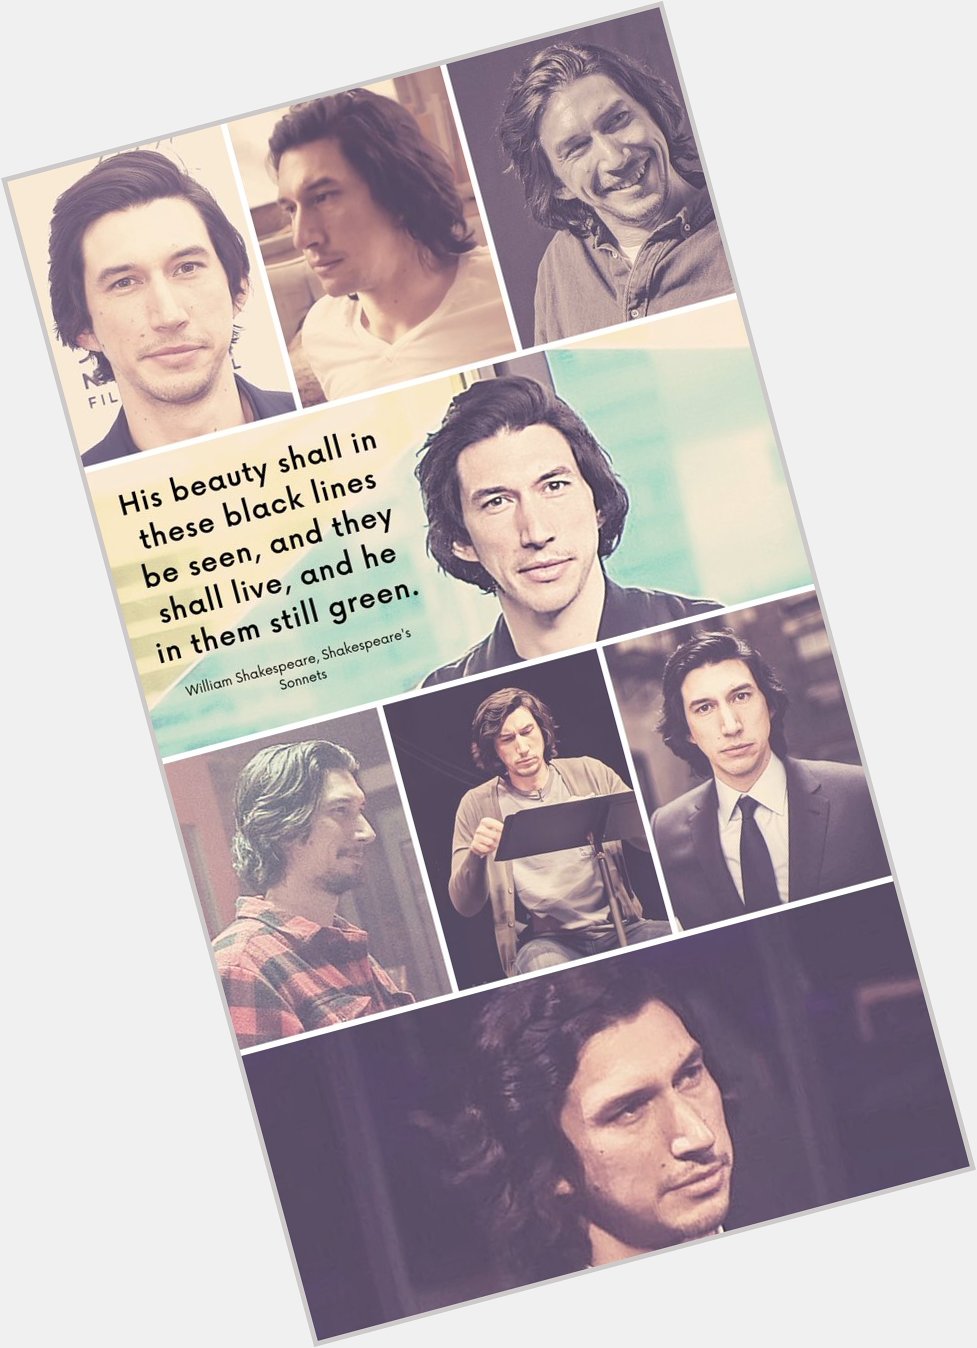 Happy birthday Mr. Adam Driver! 

A phone wallpaper for all of you to celebrate   